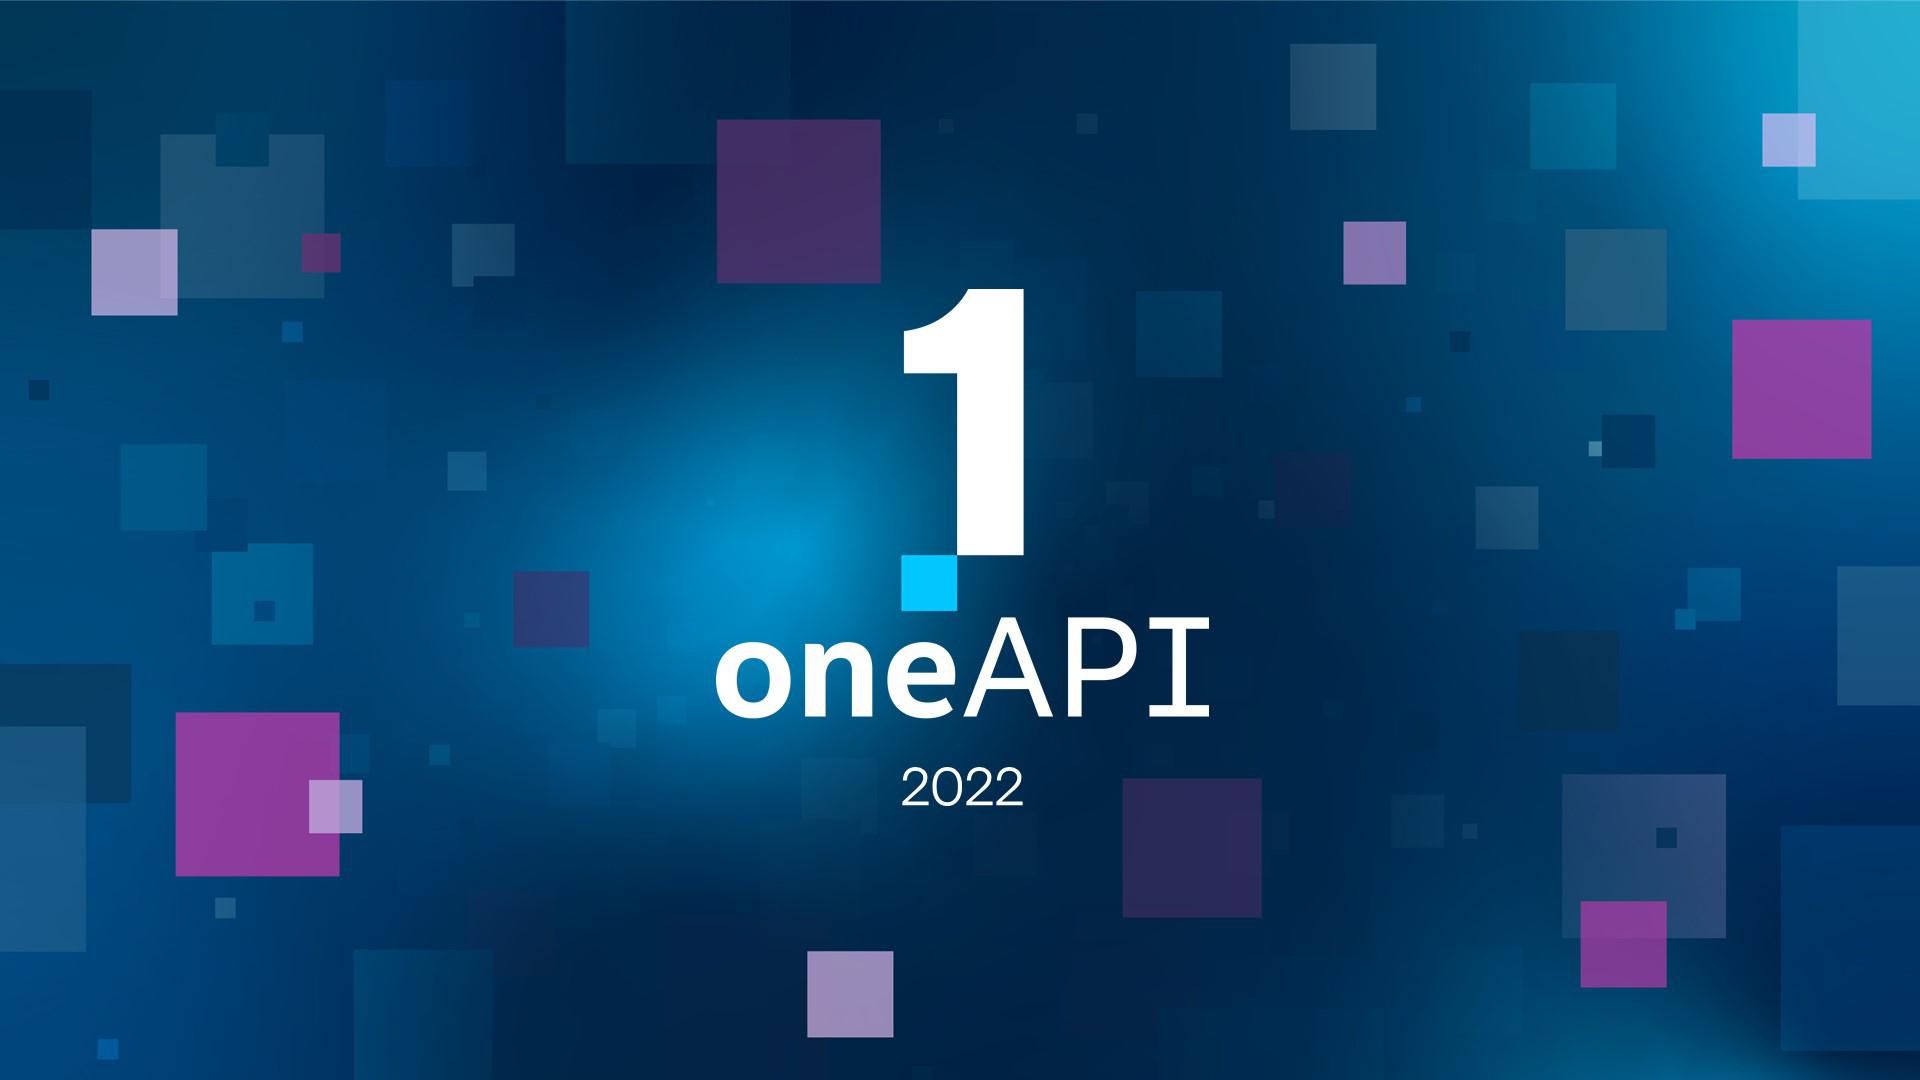 oneAPI 2022 graphic with colorful background